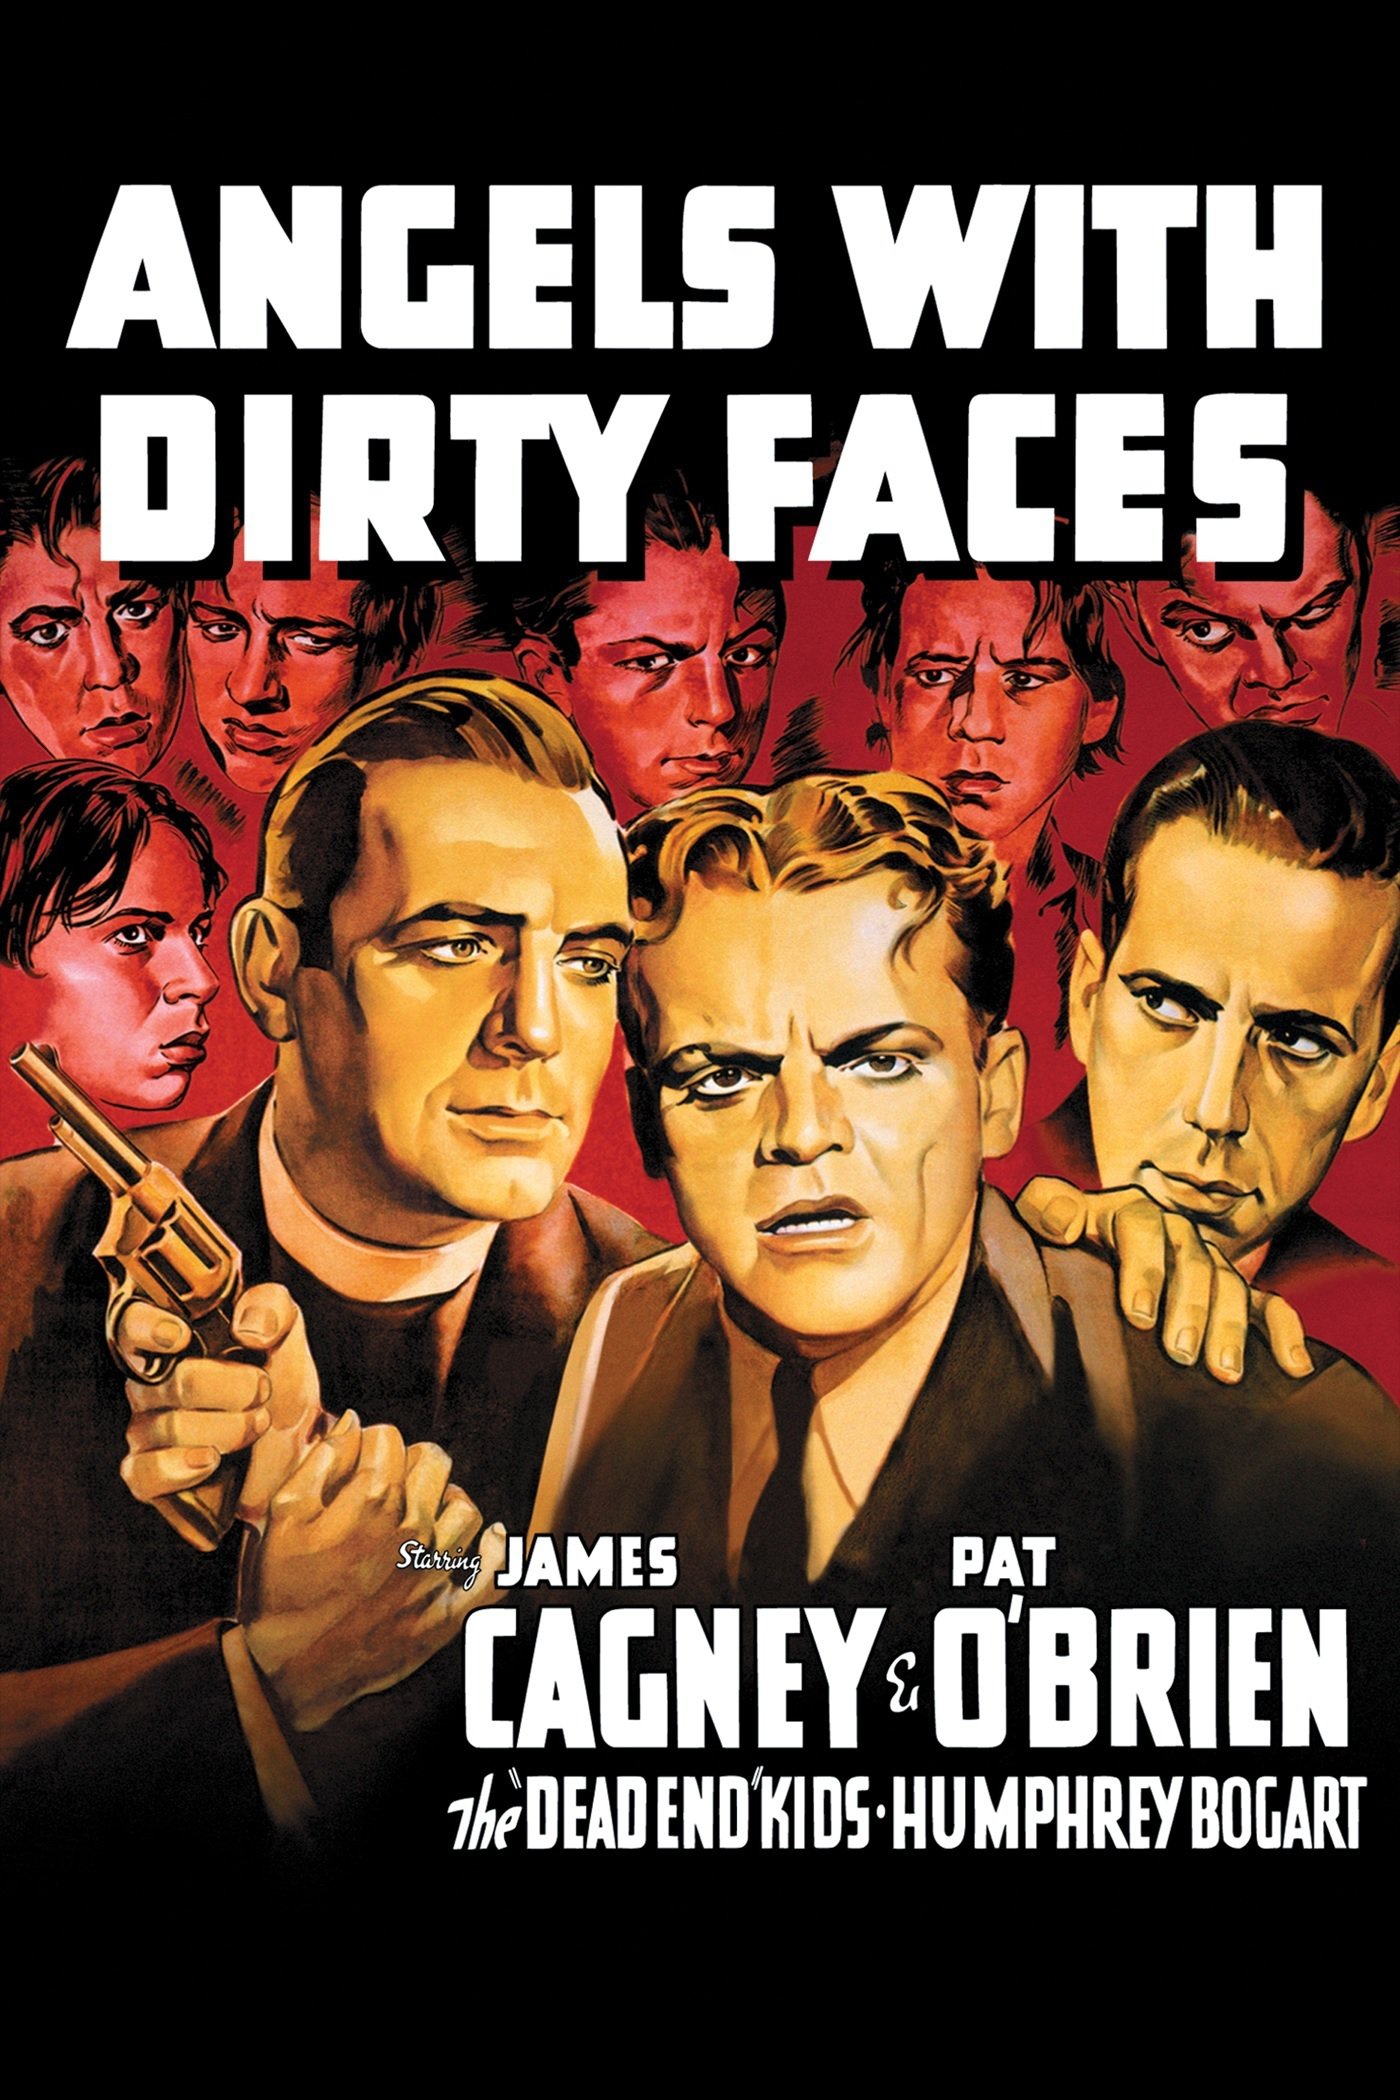 Poster for the movie "Angels with Dirty Faces"